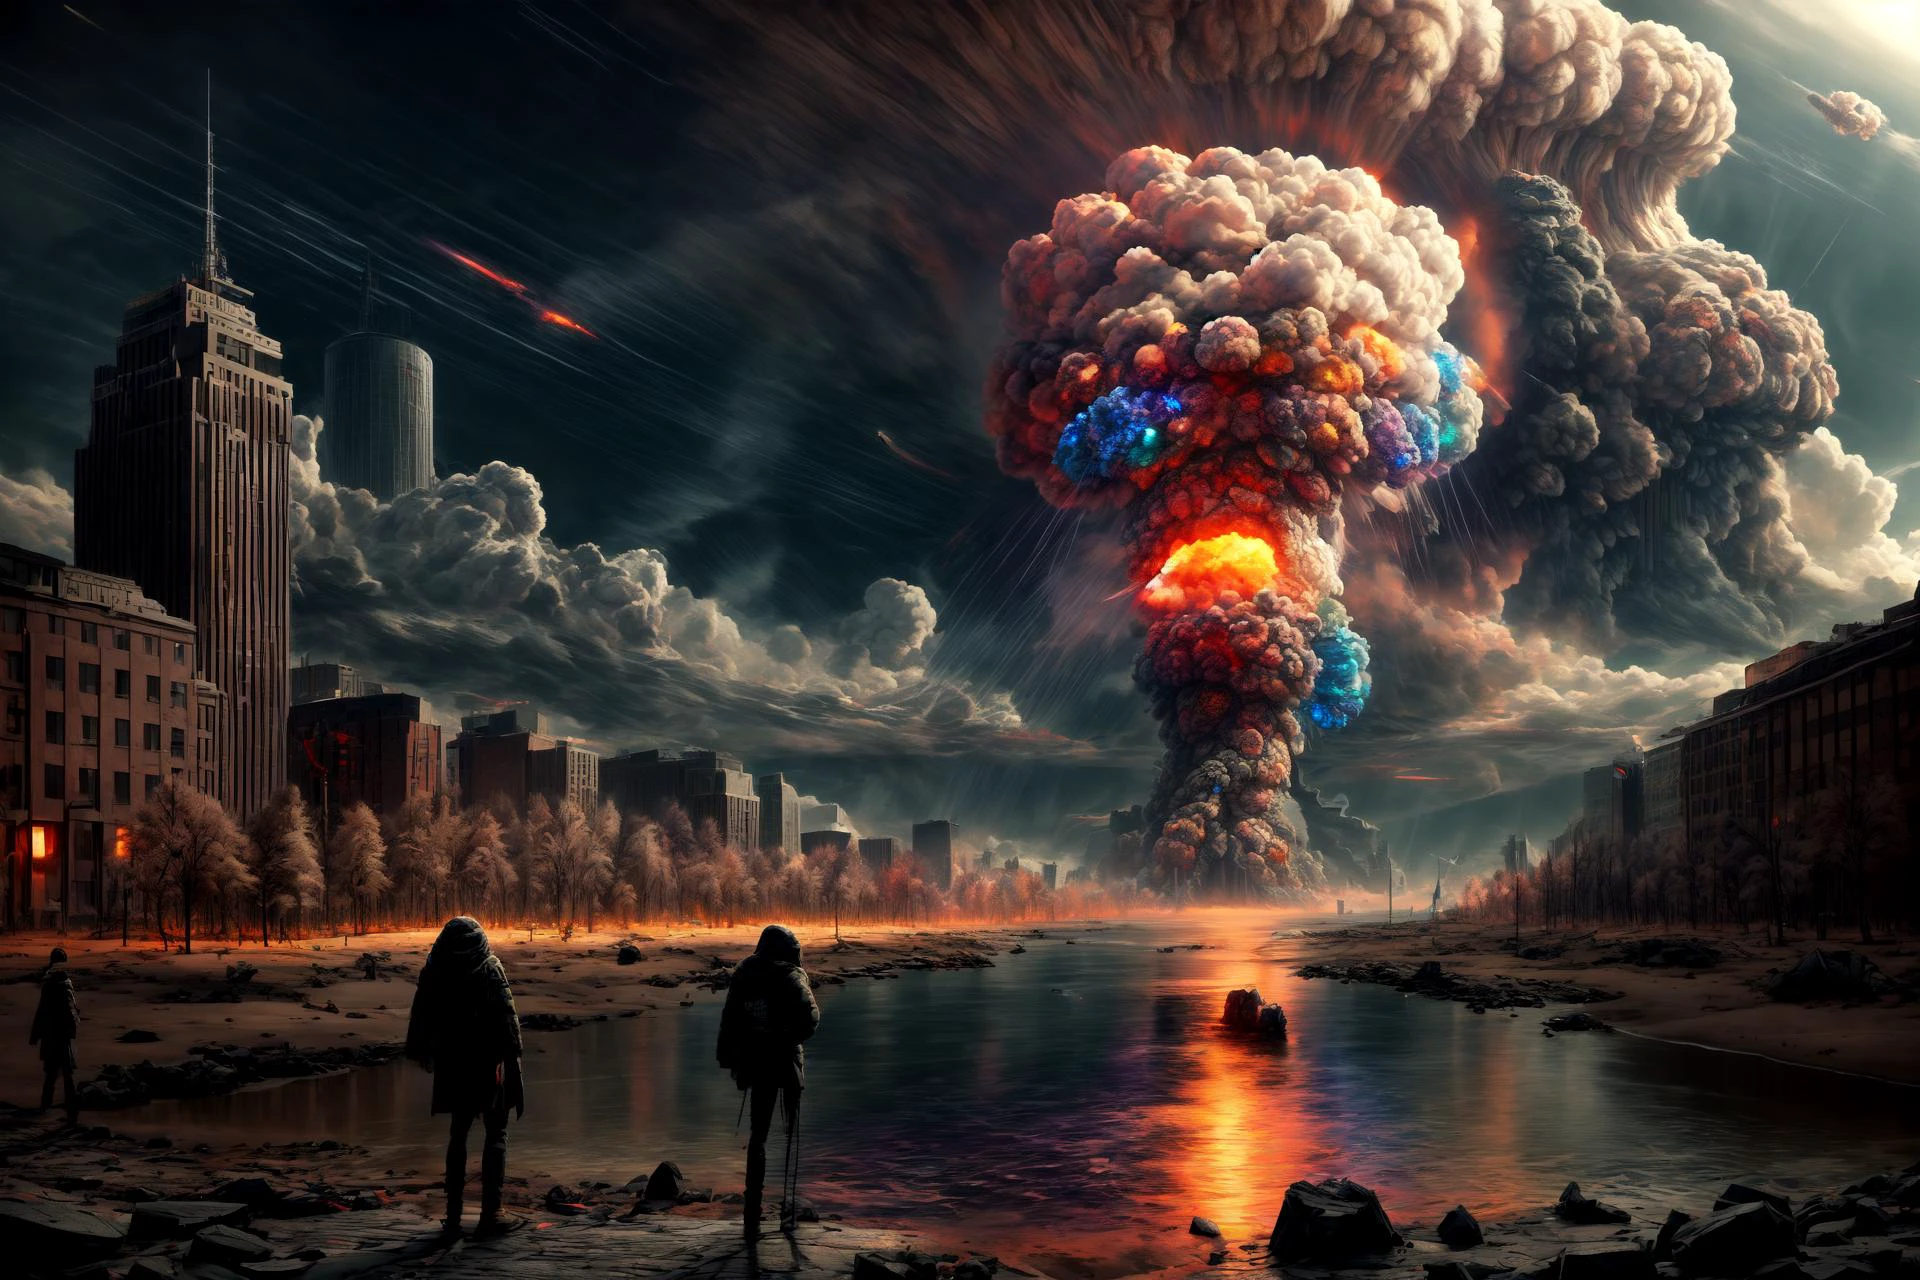 masterpiece, best quality, highres, 8k, (((colorful))),  martius_fuzz, one large illuminated nuclear blast with shockwave by emb-nuke2 in the distance, long distance shot 